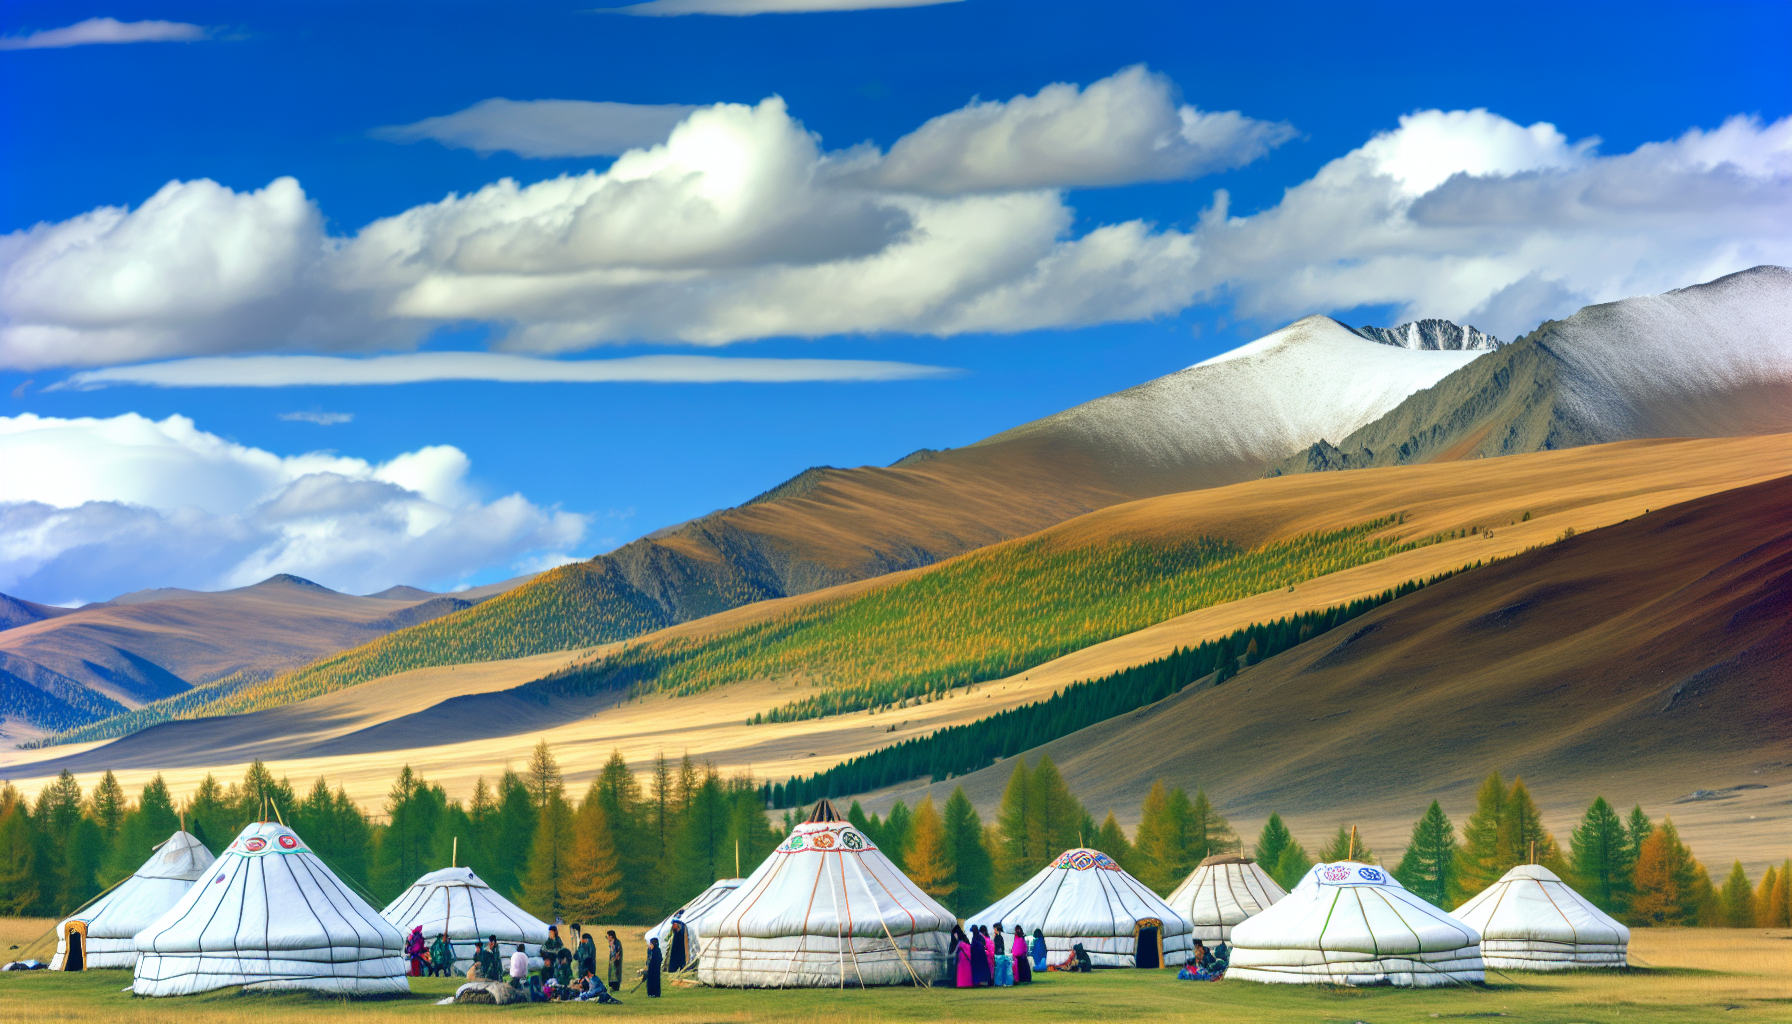 Nomadic families with their traditional gers in the stunning landscapes of Northern Mongolia, providing a glimpse into the unique nomadic lifestyle during Mongolia tours.